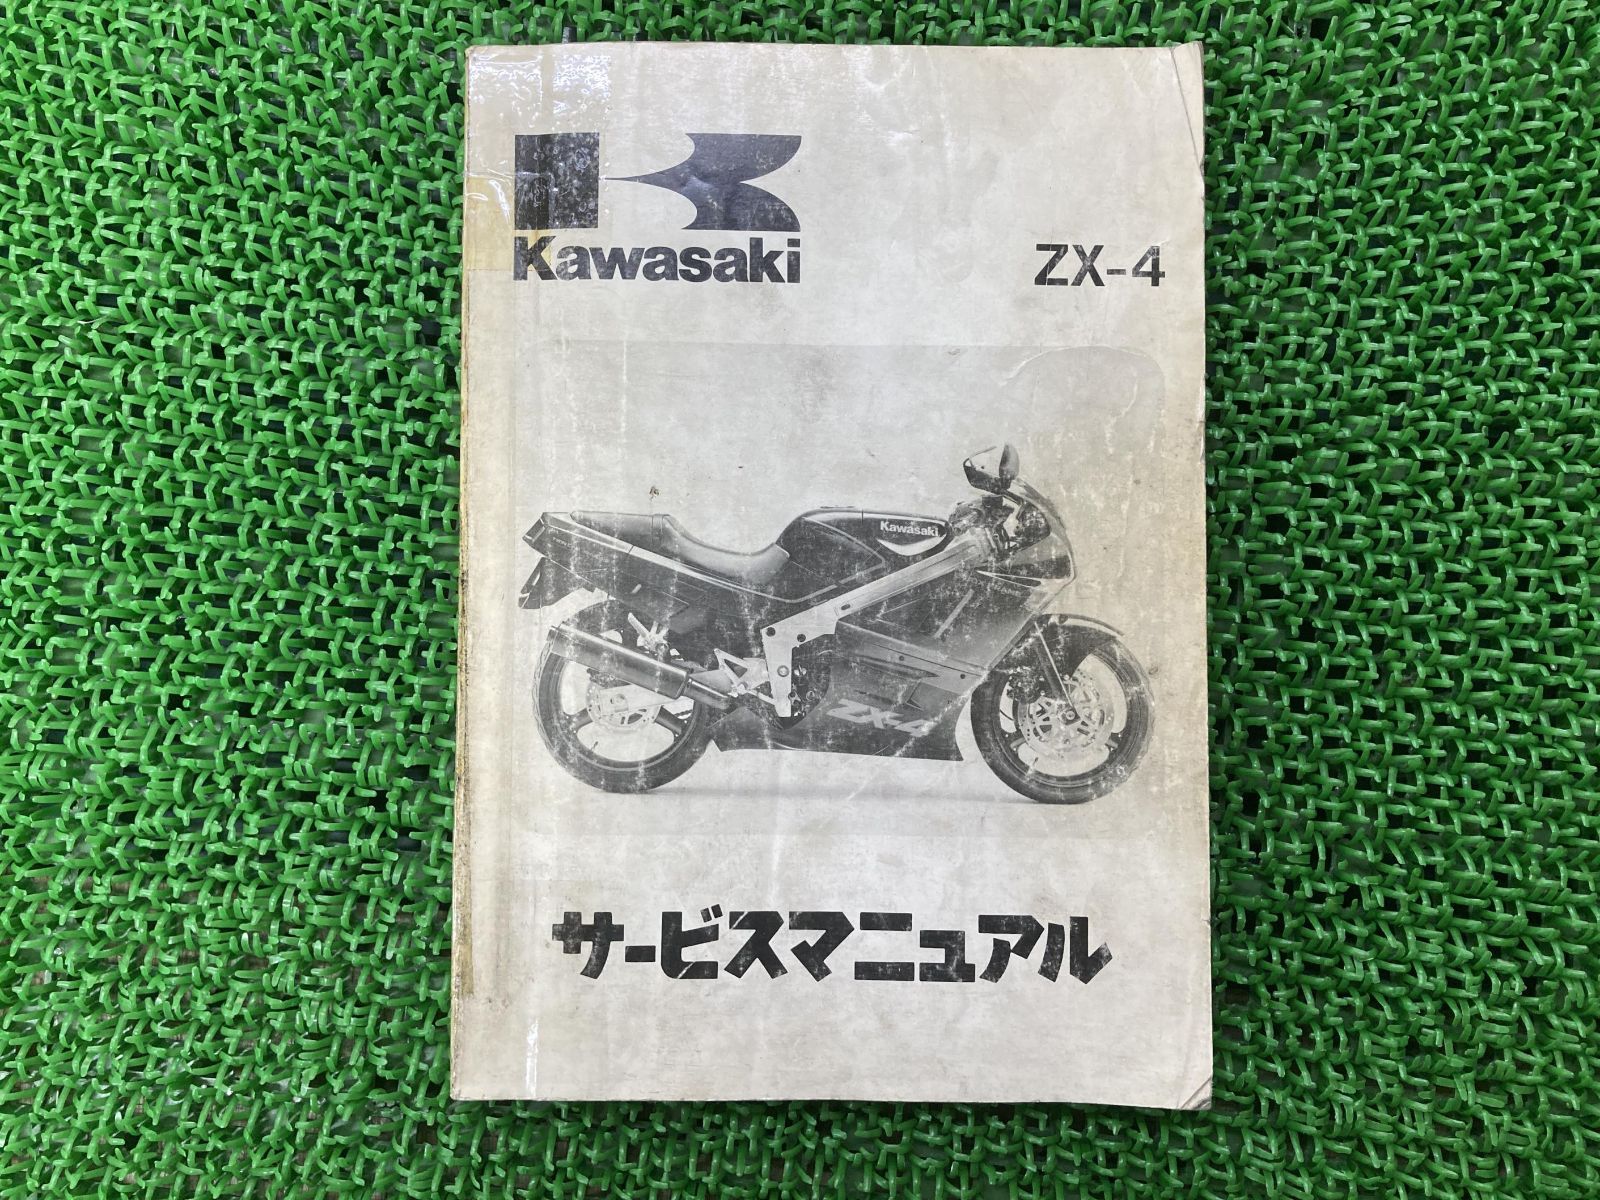 ZX-4 サービスマニュアル 1版 カワサキ 正規 中古 バイク 整備書 ZX400 